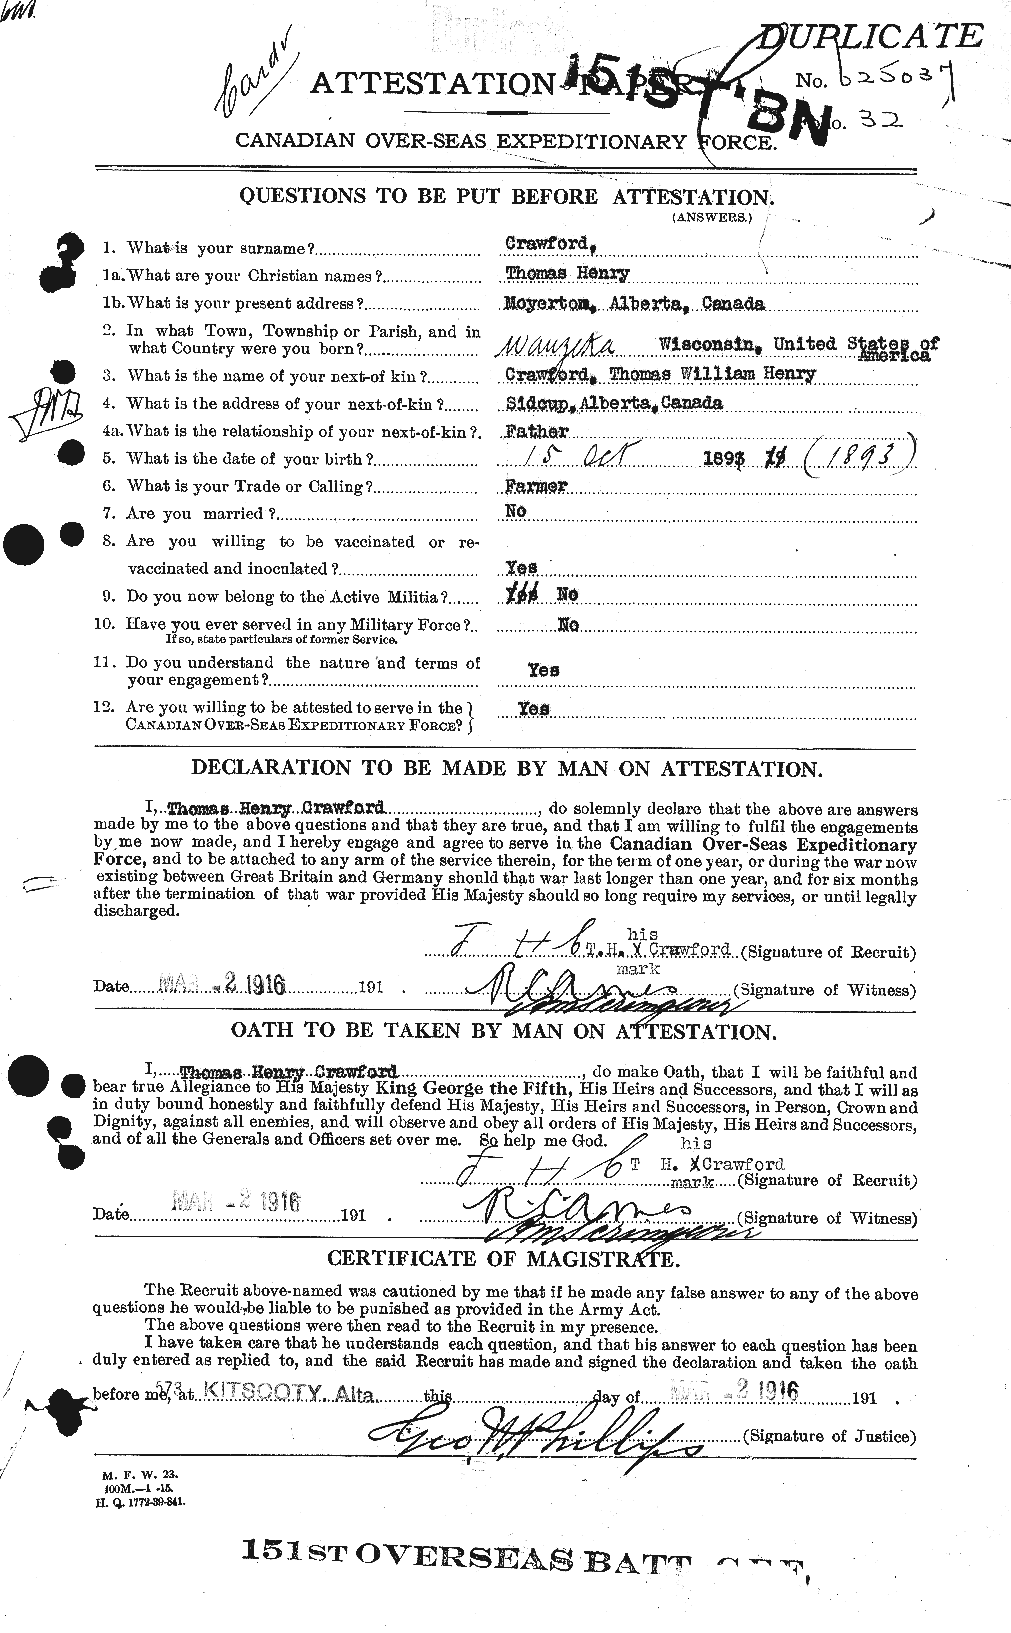 Personnel Records of the First World War - CEF 061352a